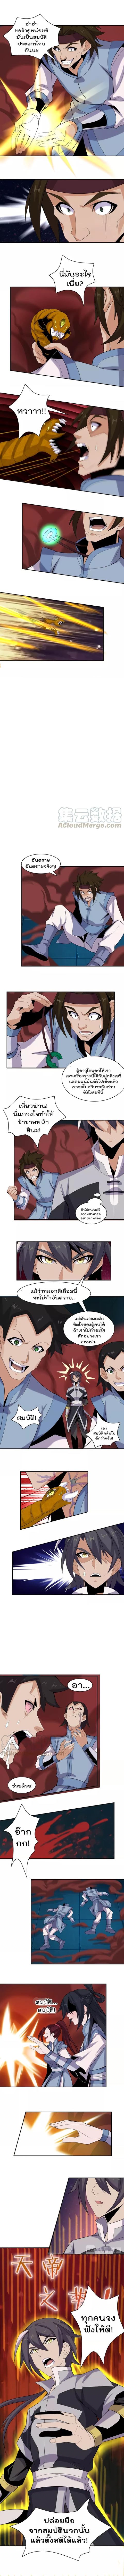 Swallow the Whole World เทพอสูรกลืนกินพิภพ 28-28